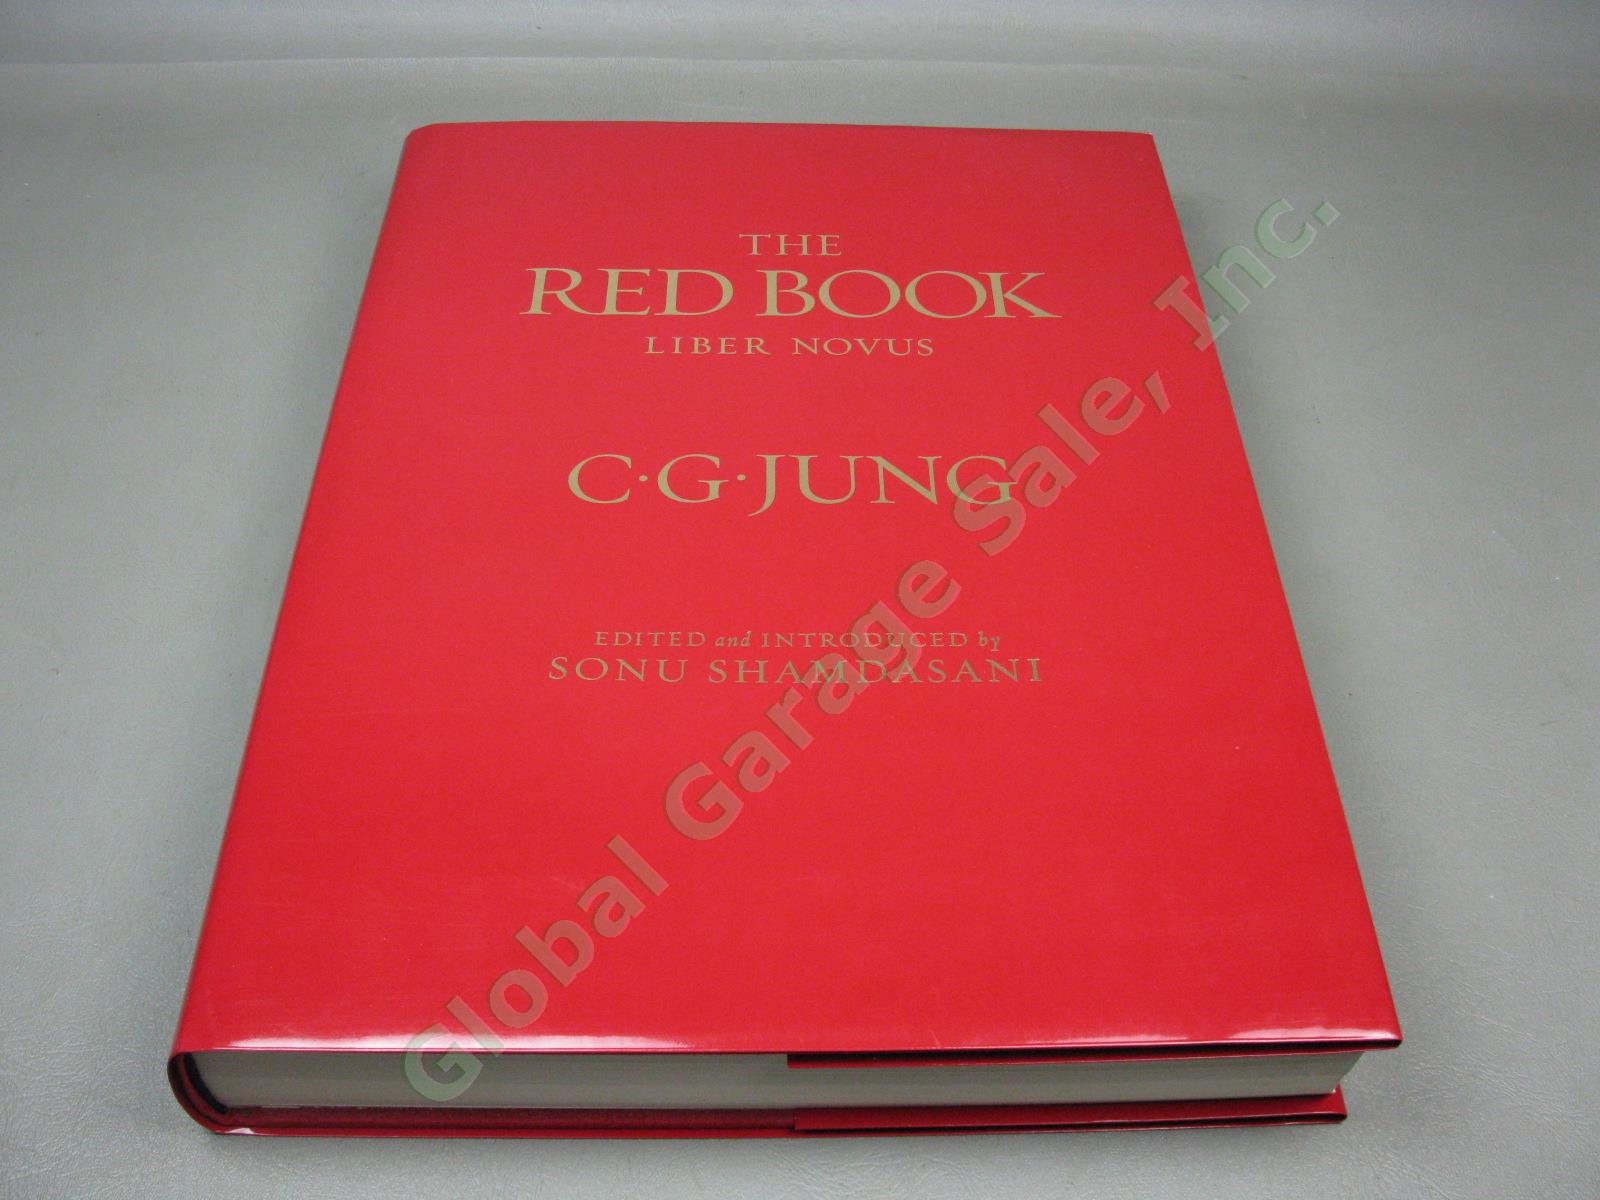 C.G Carl Jung The Red Book Liber Novus 2009 First Edition Hardcover +Dust Jacket